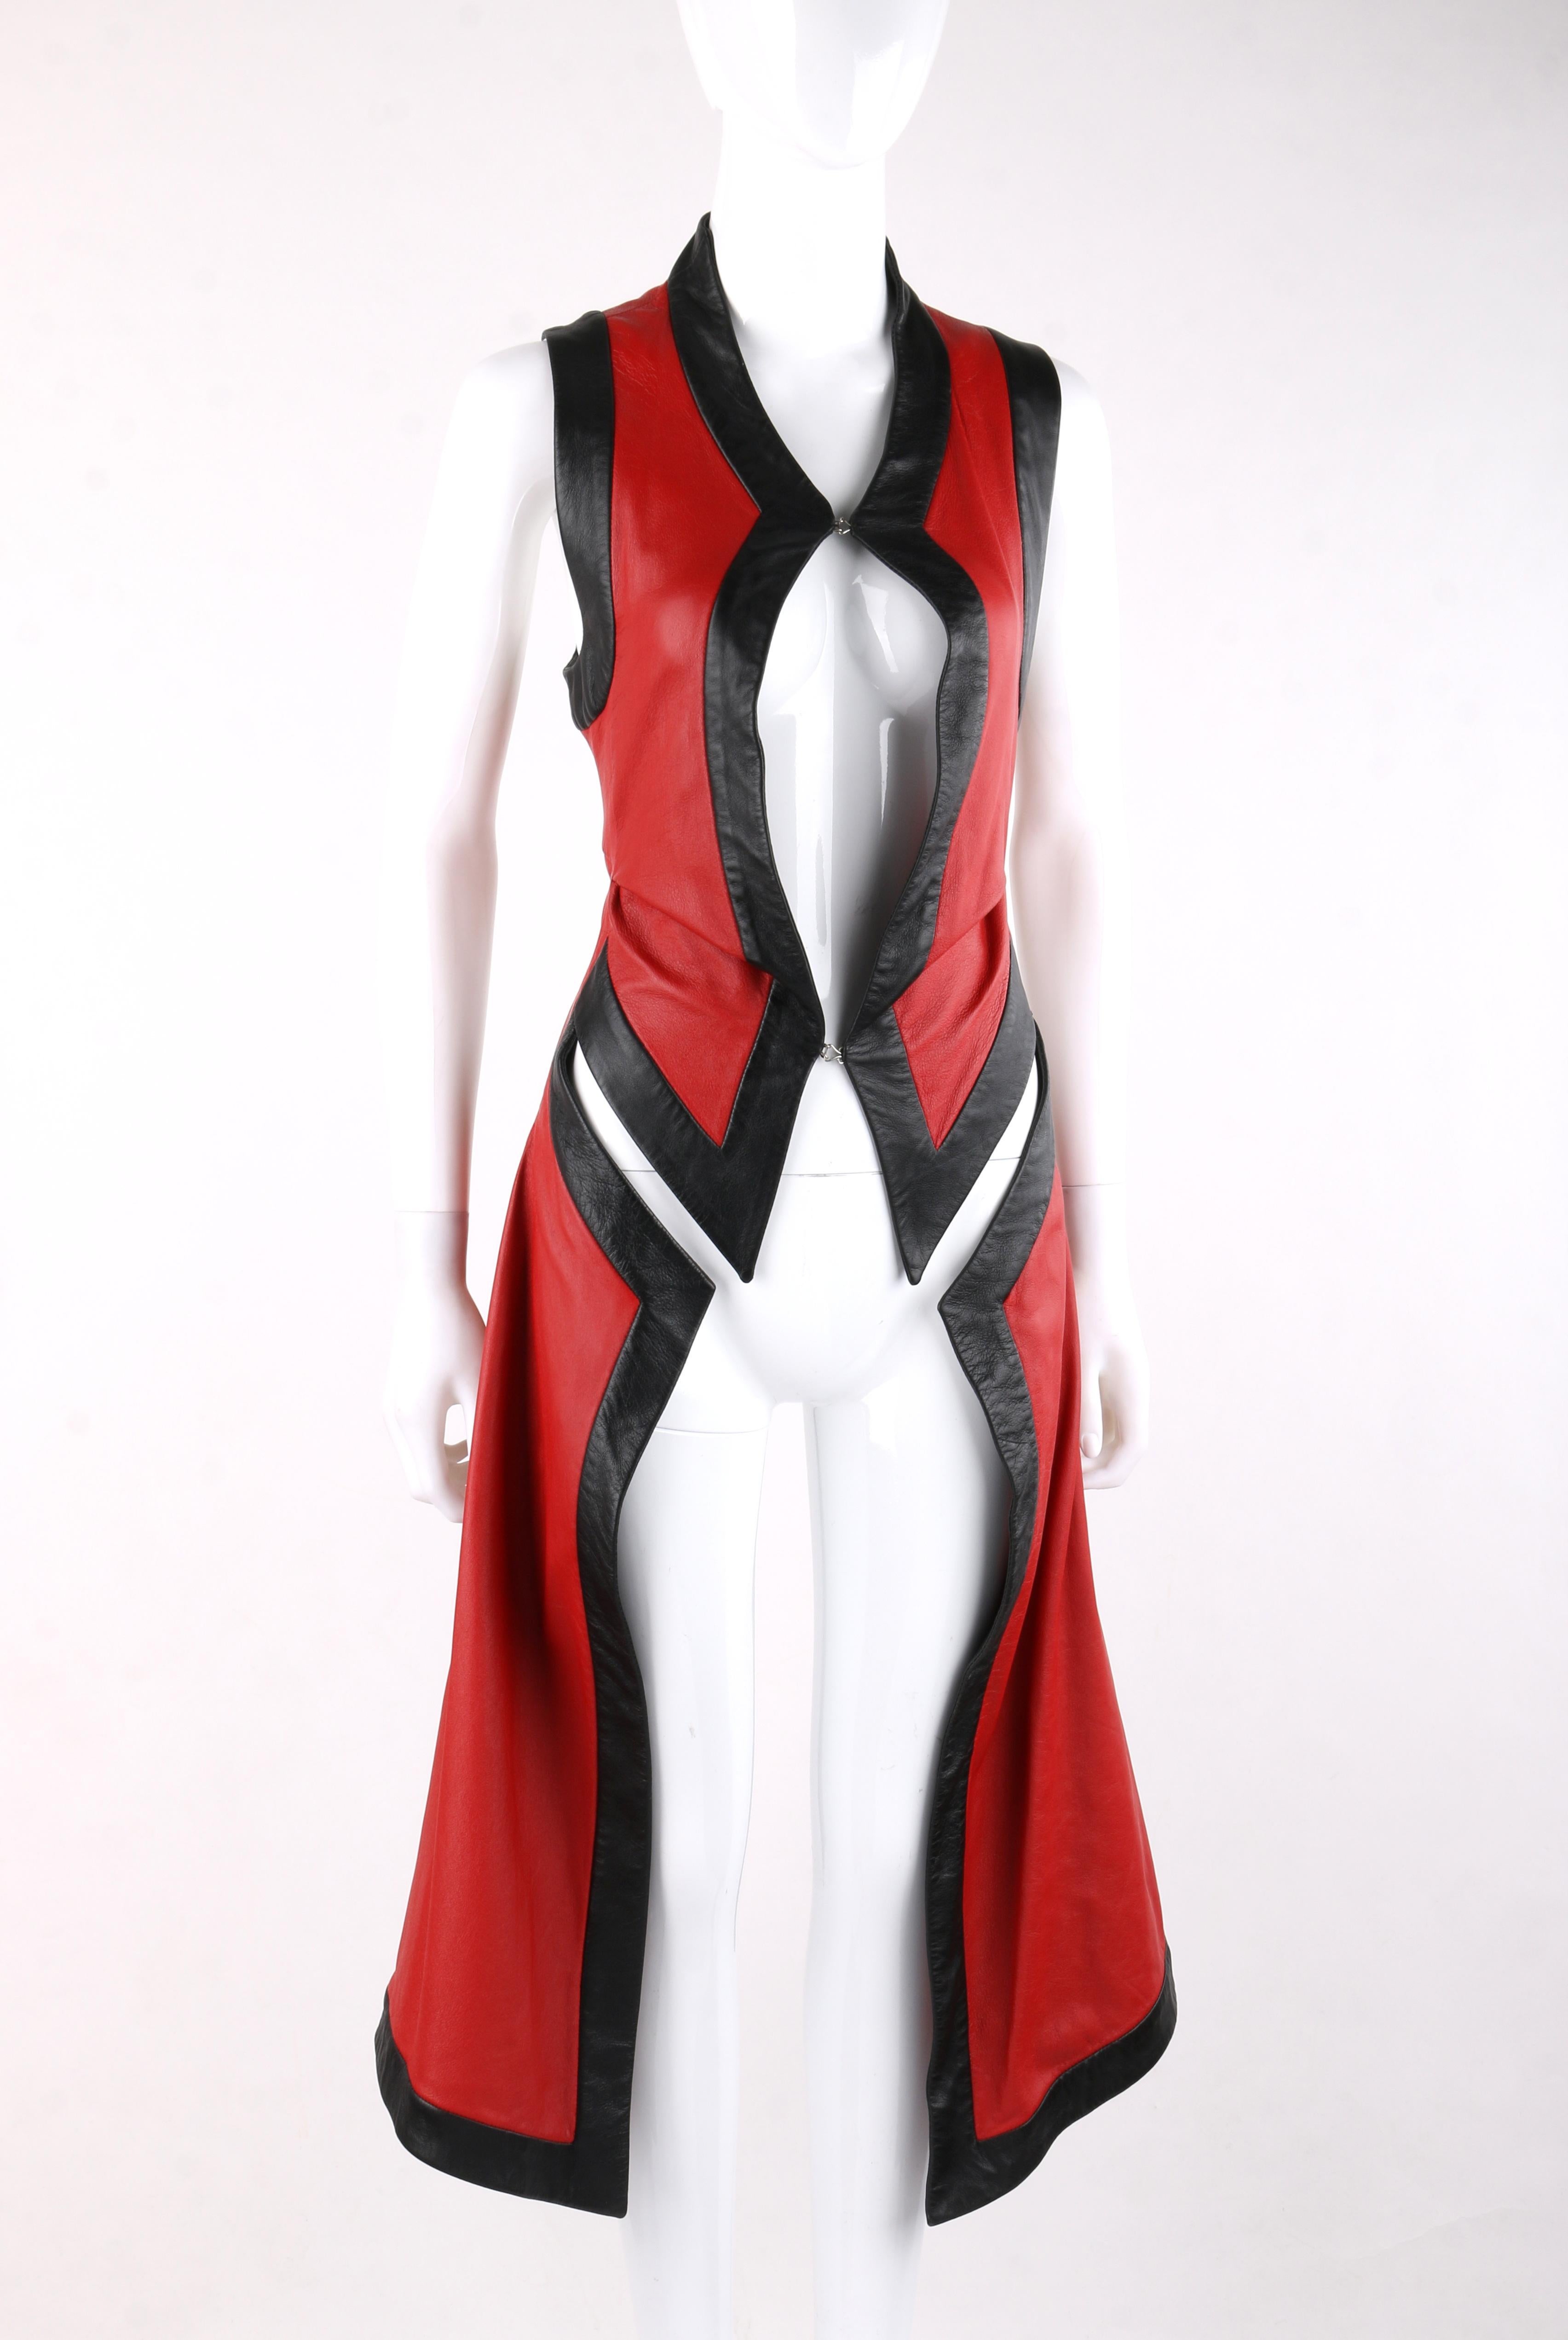 ALEXANDER McQUEEN S/S 2000 “Eye” Runway Red Black Leather Cut Out Vest ...